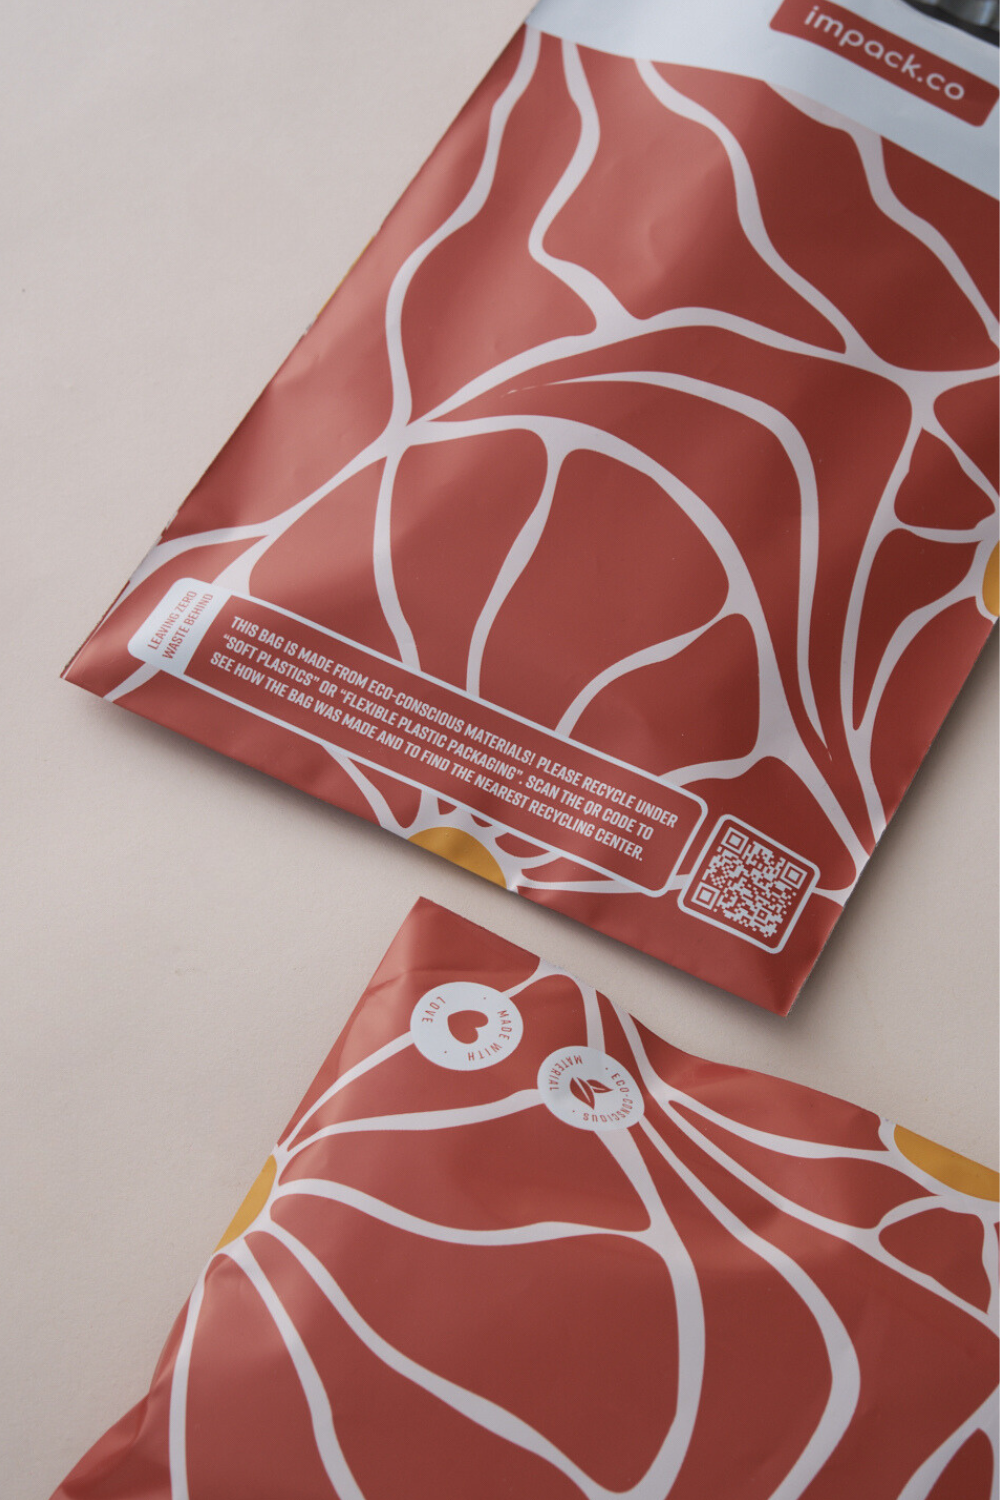 Two red packaging bags with a white abstract design, featuring the Crimson Grove print, are placed on a light surface. One bag is partially shown. Both have labels and QR codes, showcasing these Crimson Crove Mailers 10" x 13" by impack.co as a versatile packaging solution.